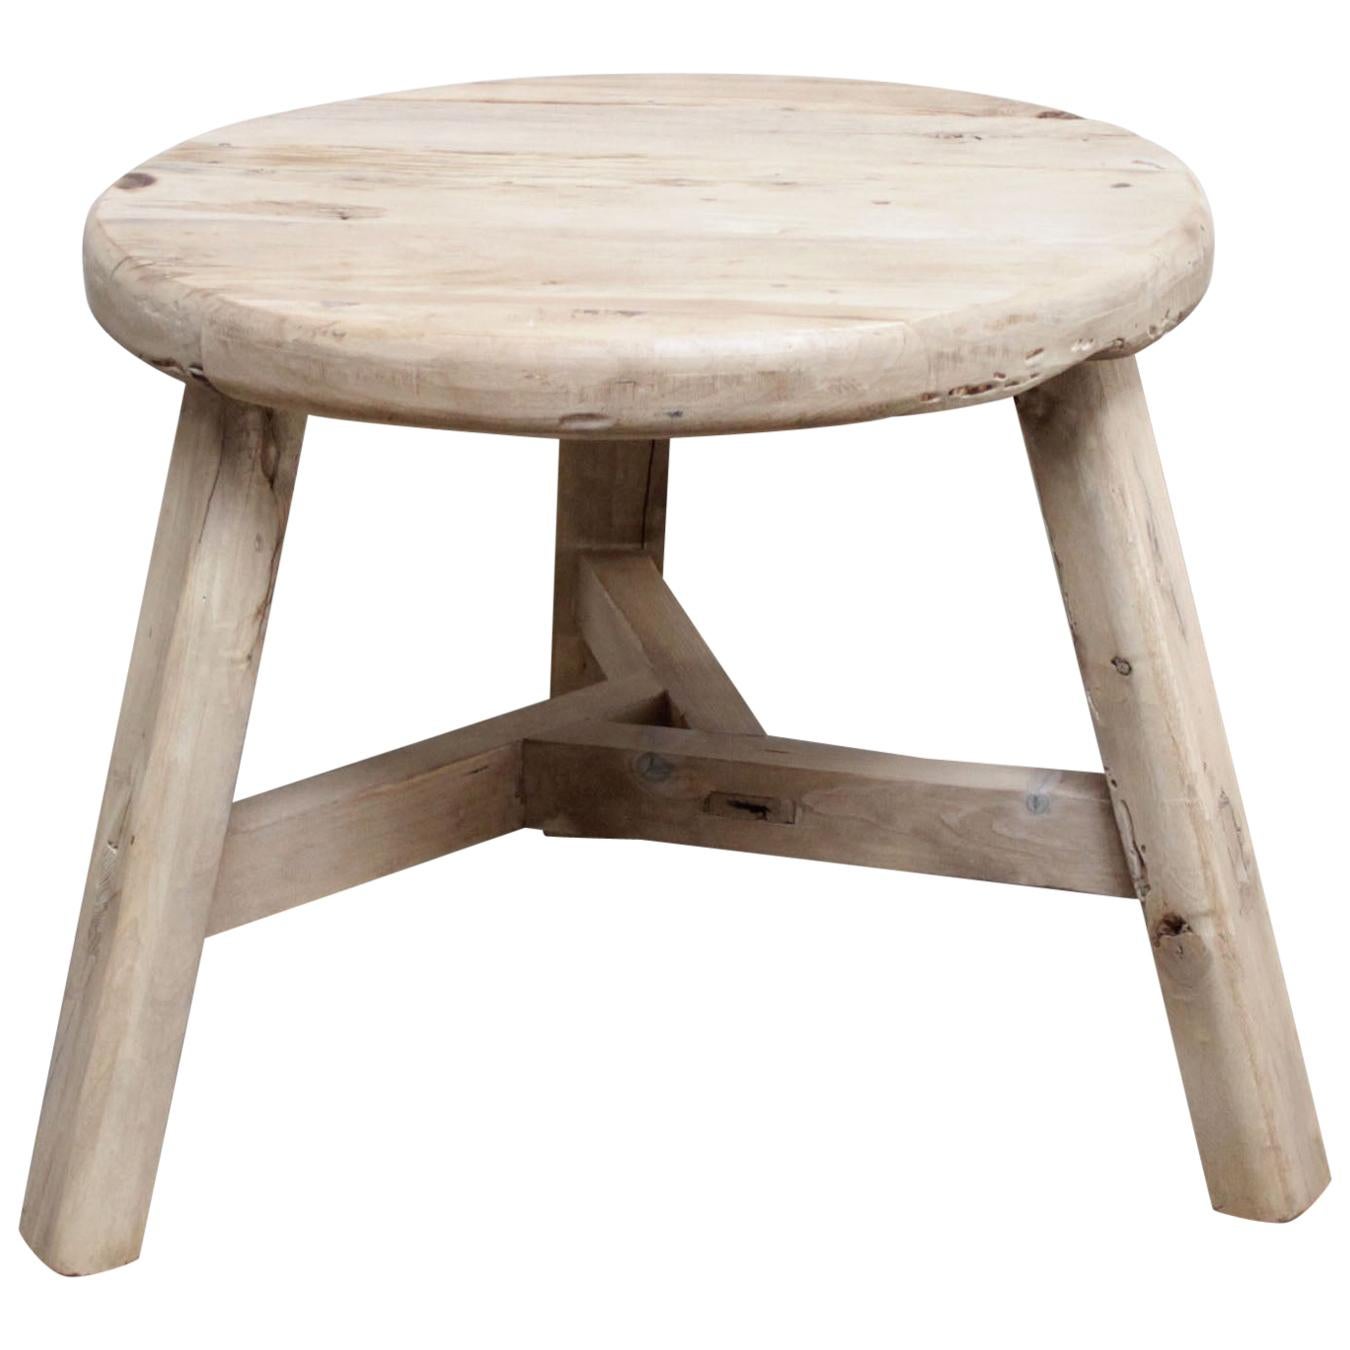 Round Natural Side Table Made from Reclaimed Elmwood